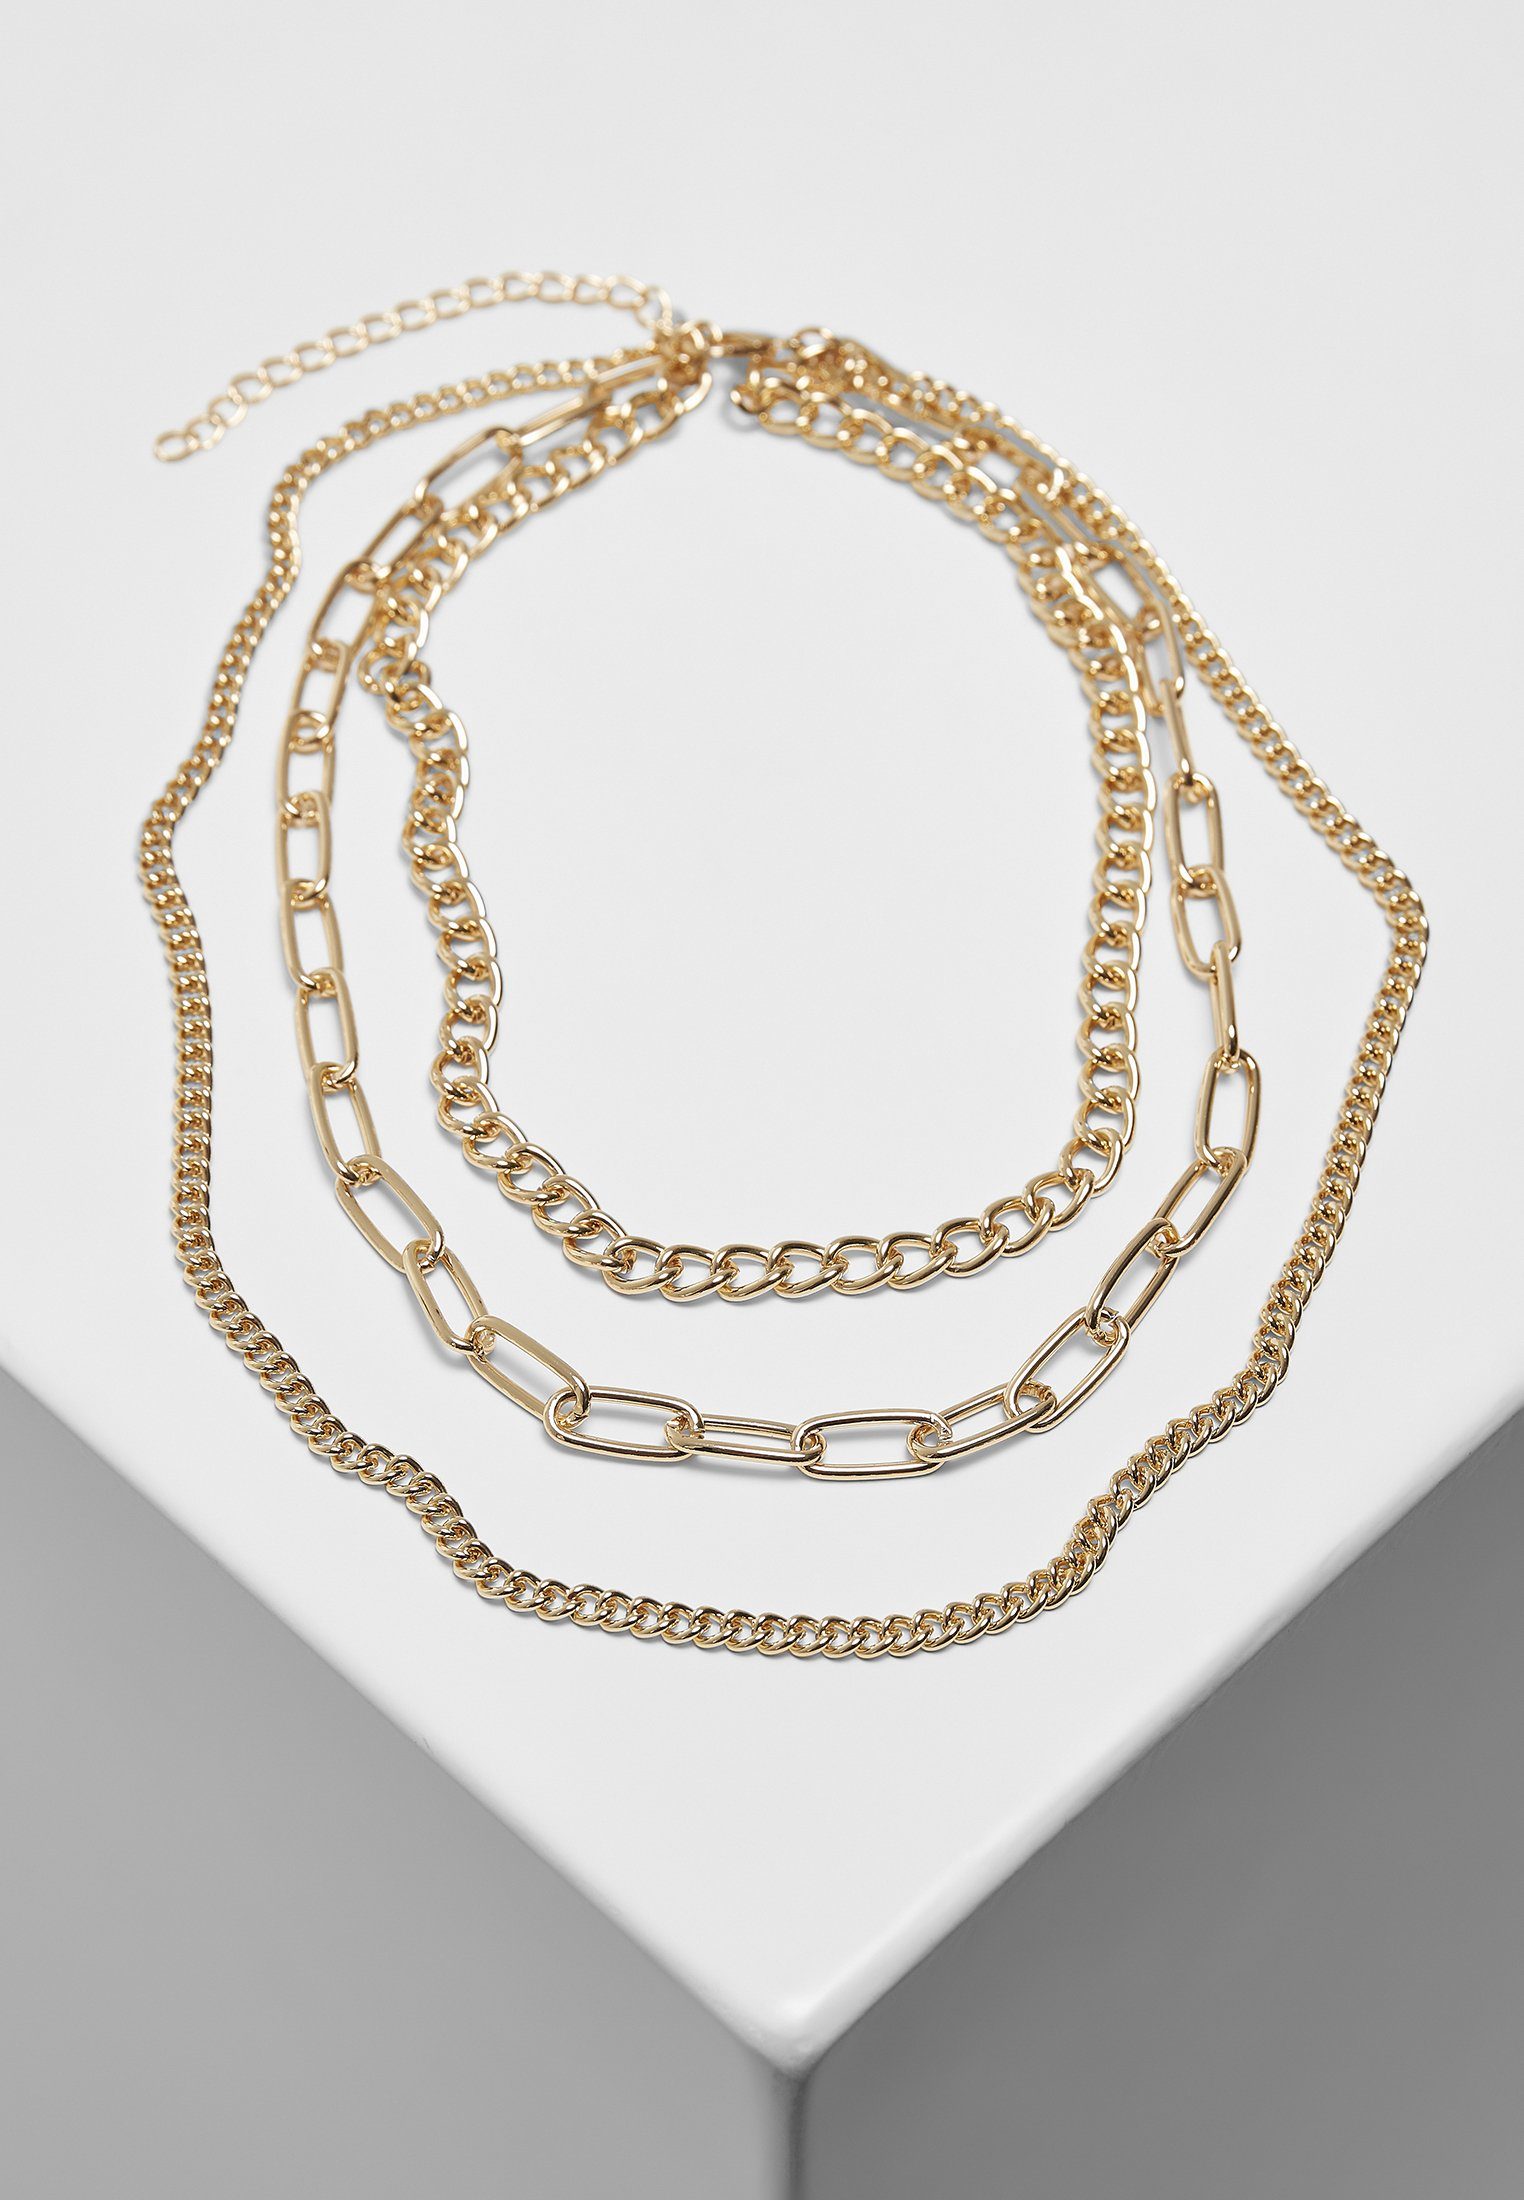 Necklace Edelstahlkette CLASSICS gold Accessoires Layering URBAN Chain